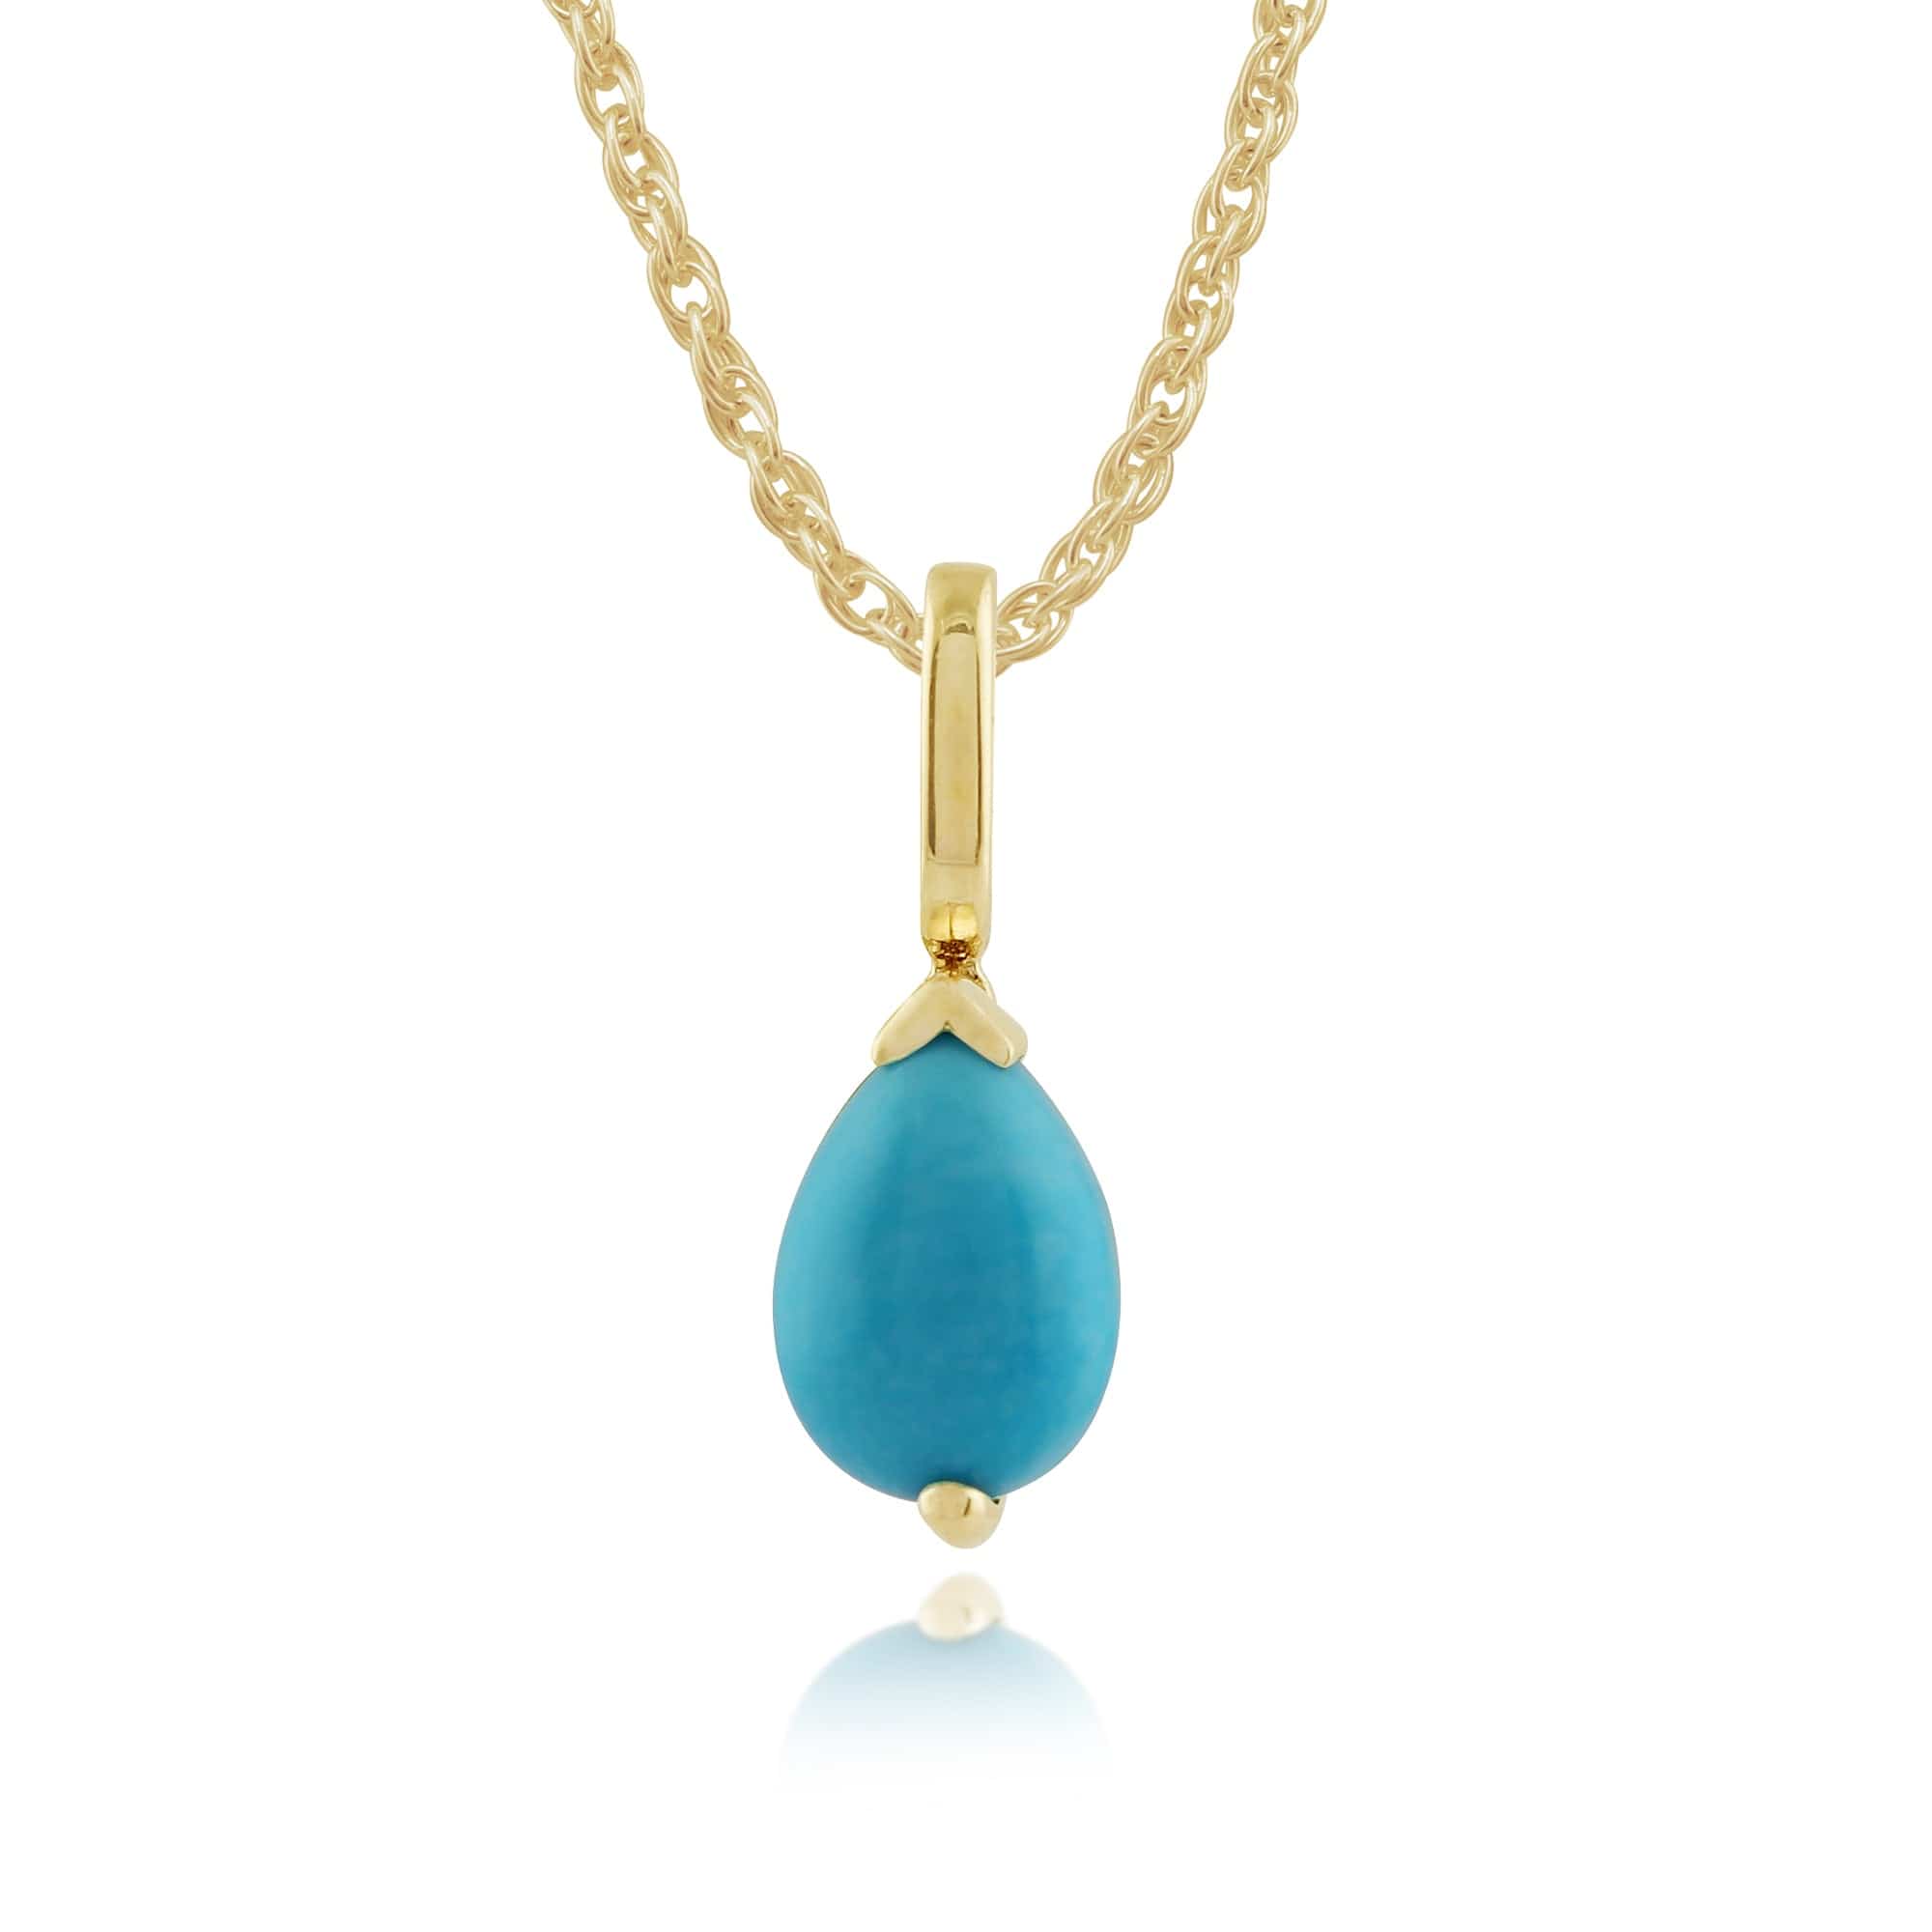 Photos - Pendant / Choker Necklace Classic Pear Turquoise Pendant in 9ct Yellow Gold